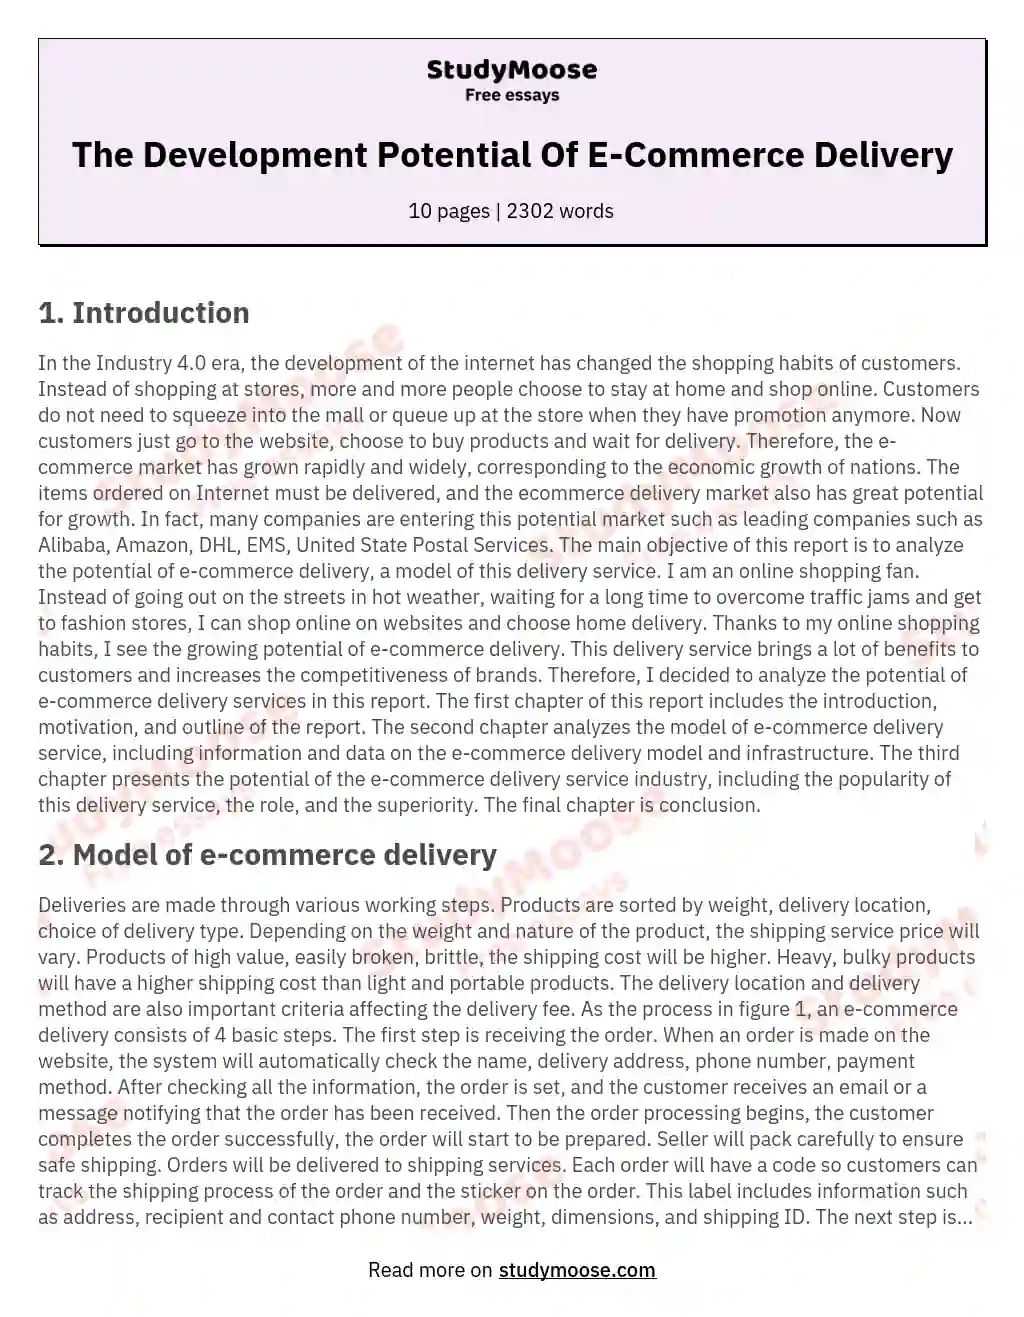 The Development Potential Of E-Commerce Delivery essay